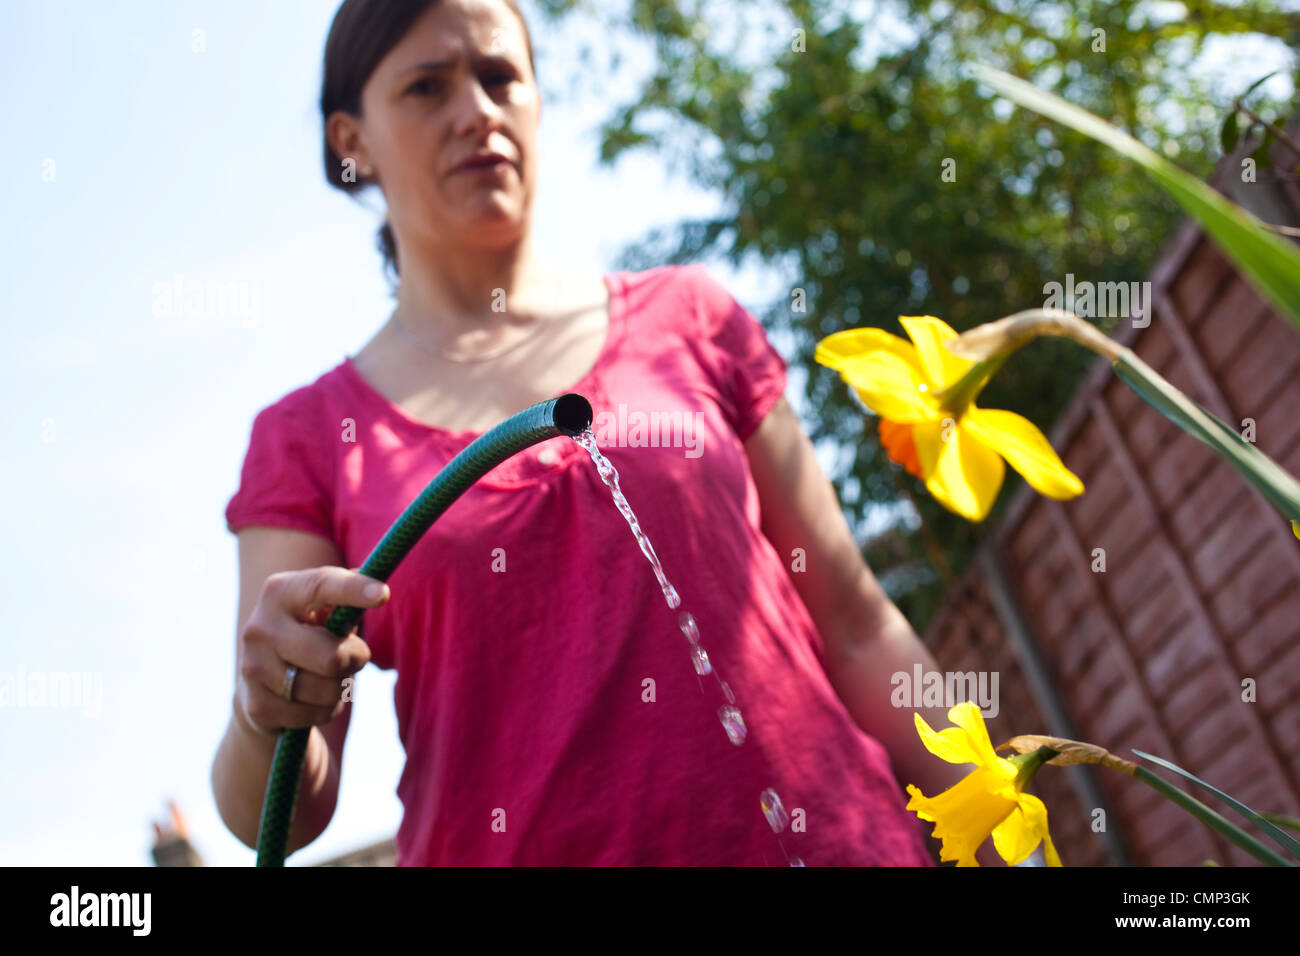 Woman watering flowers in back garden ahead of the national hosepipe ban which could be implemented due to dry weather across UK Stock Photo